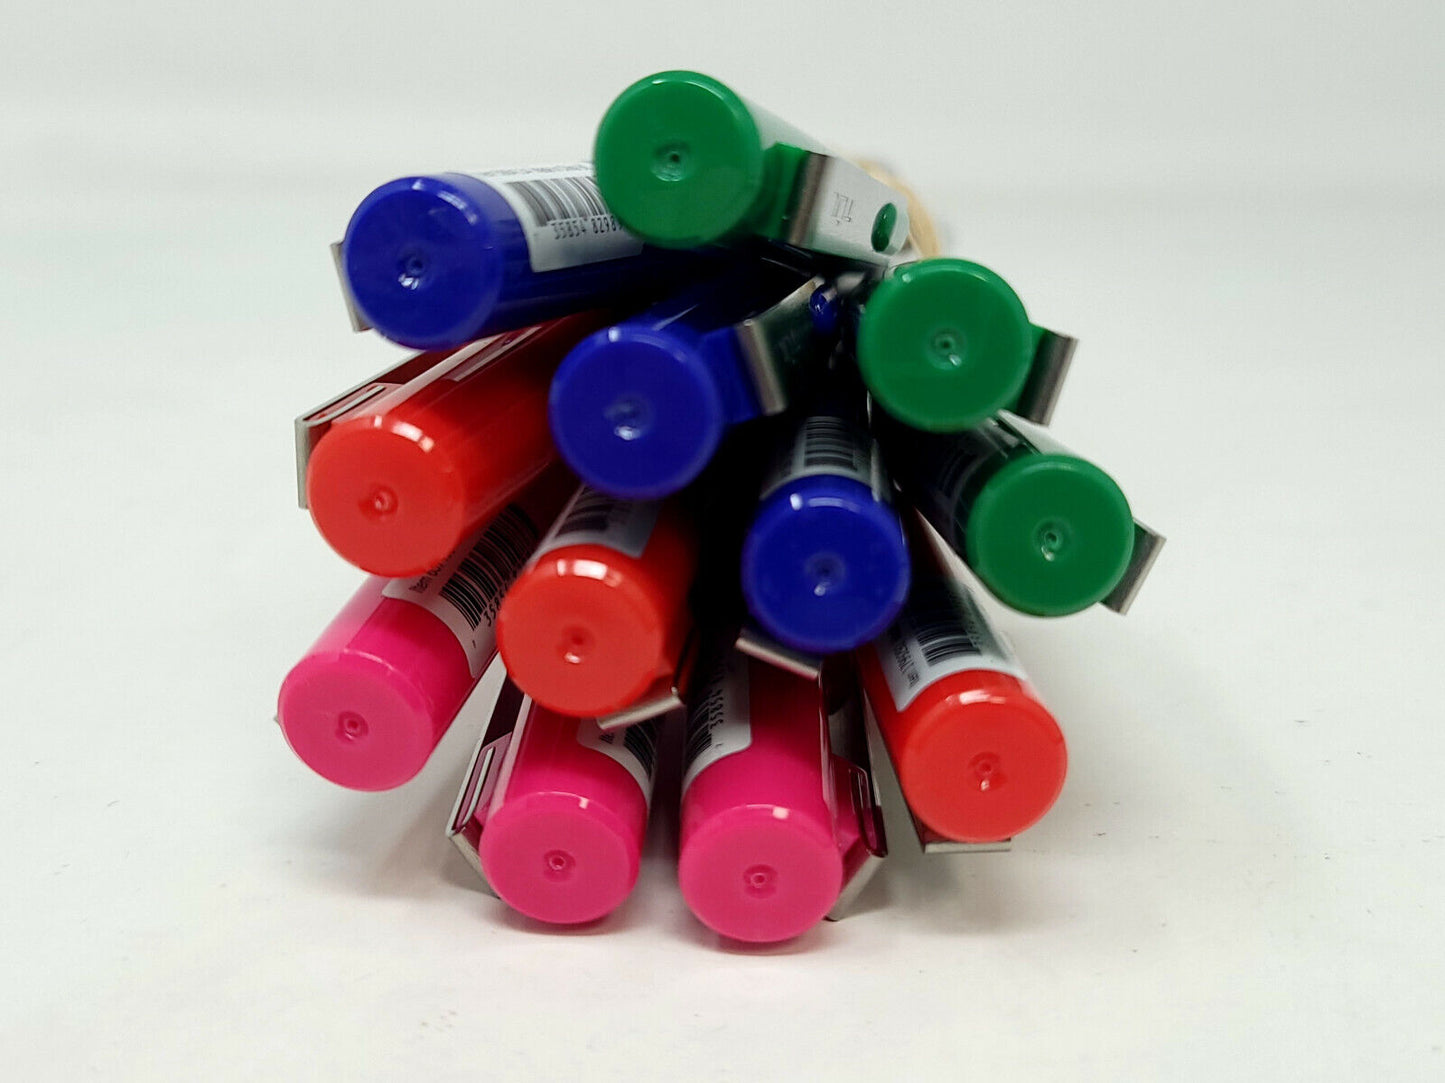 TUL Liner - Green, Blue, Red, Pink - 3 ea total 12 liners - NEW